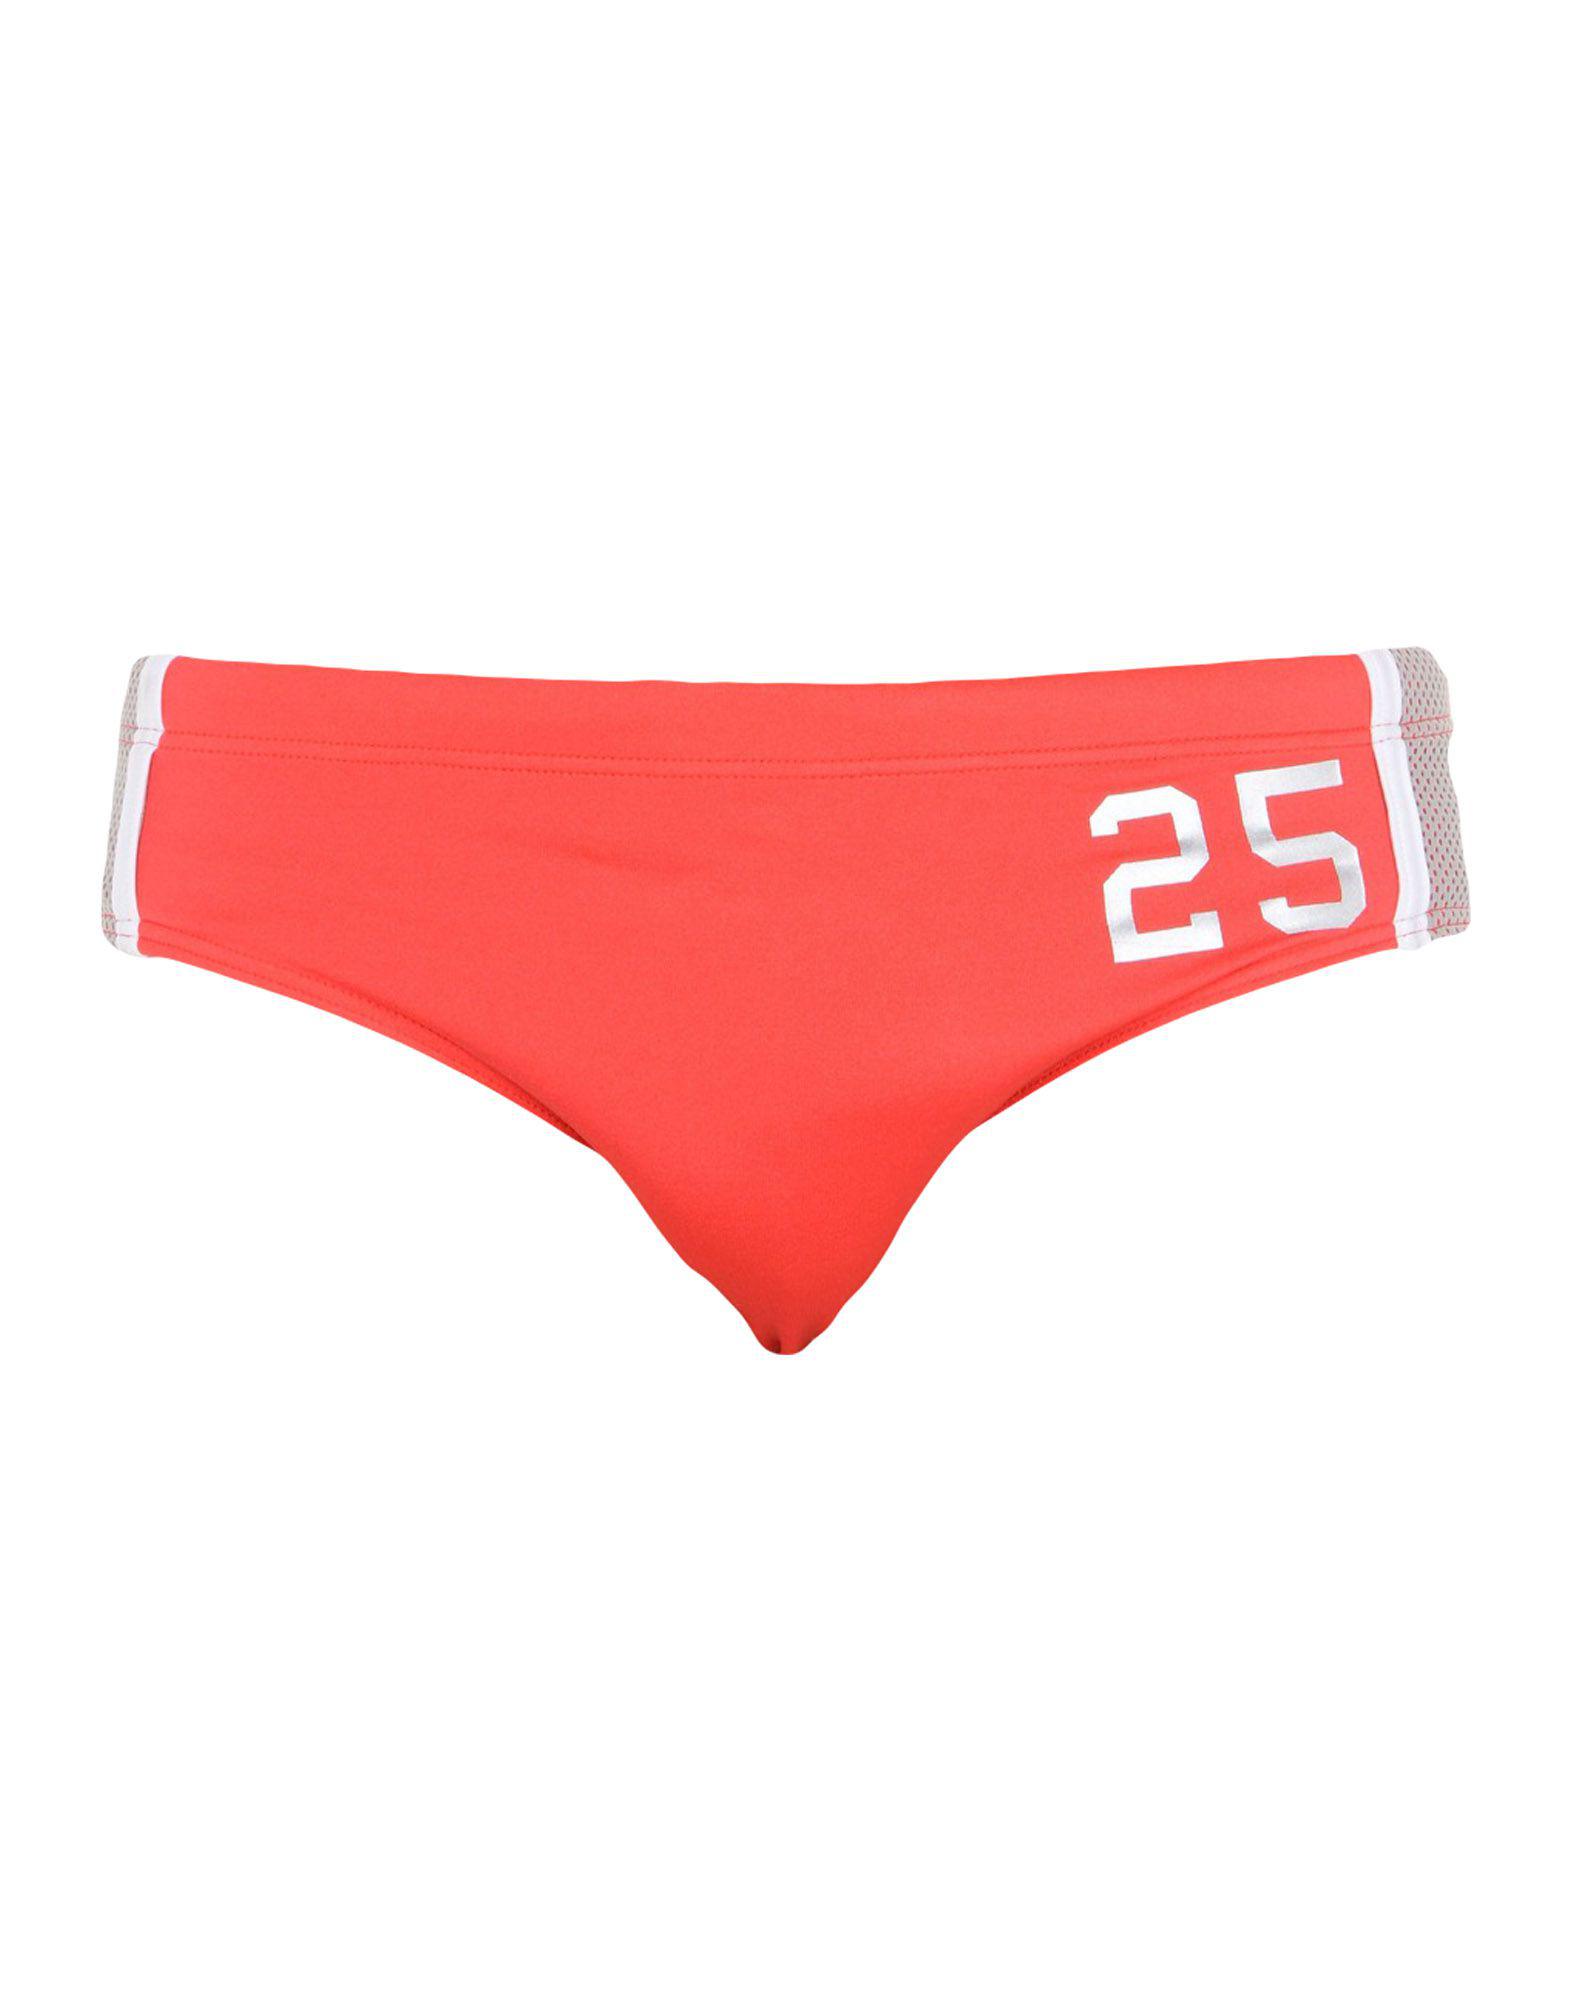 Bikkembergs Synthetic Swim Brief in Red for Men - Lyst